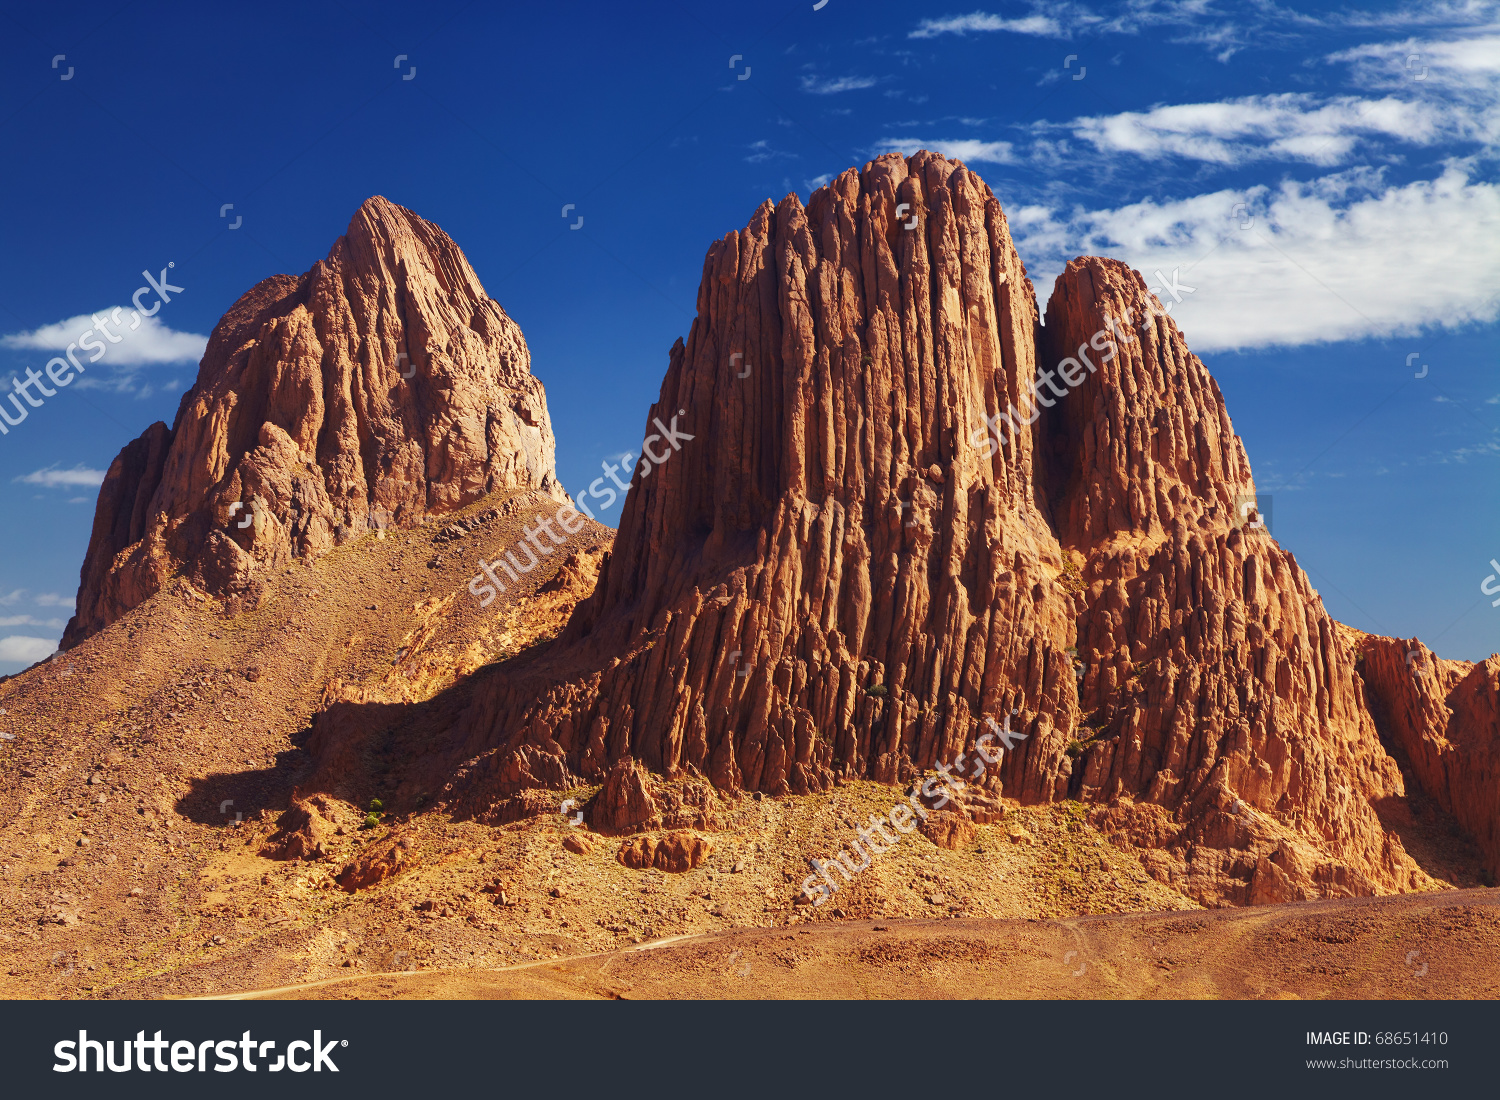 Hoggar Mountains clipart #2, Download drawings